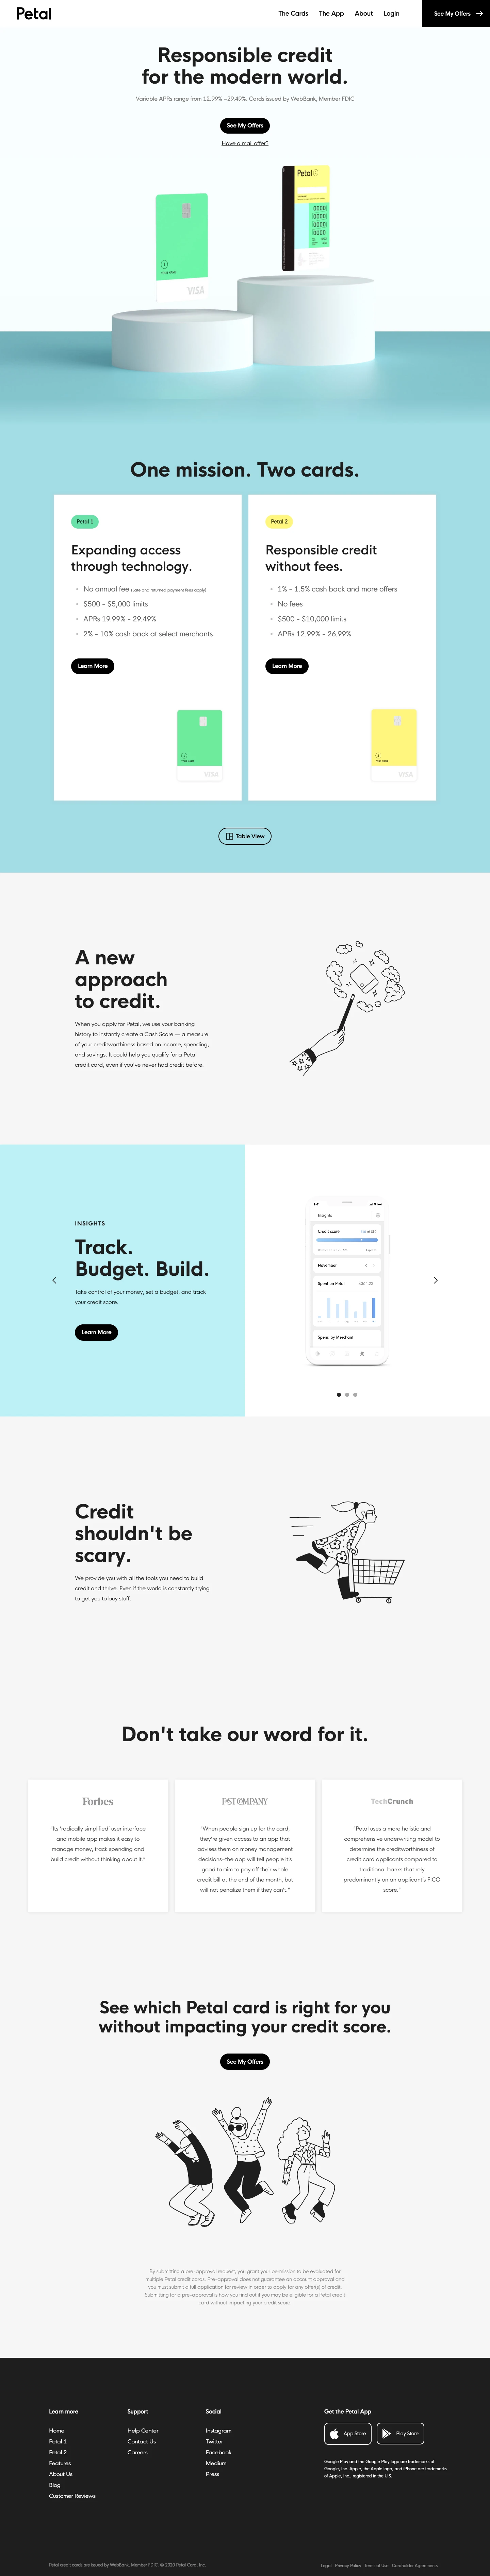 Petal Landing Page Example: Credit cards with  cash back at many local businesses, no annual or international fees, high limits, and a mobile app that makes it easy to manage your money, track your spending and automate payments.